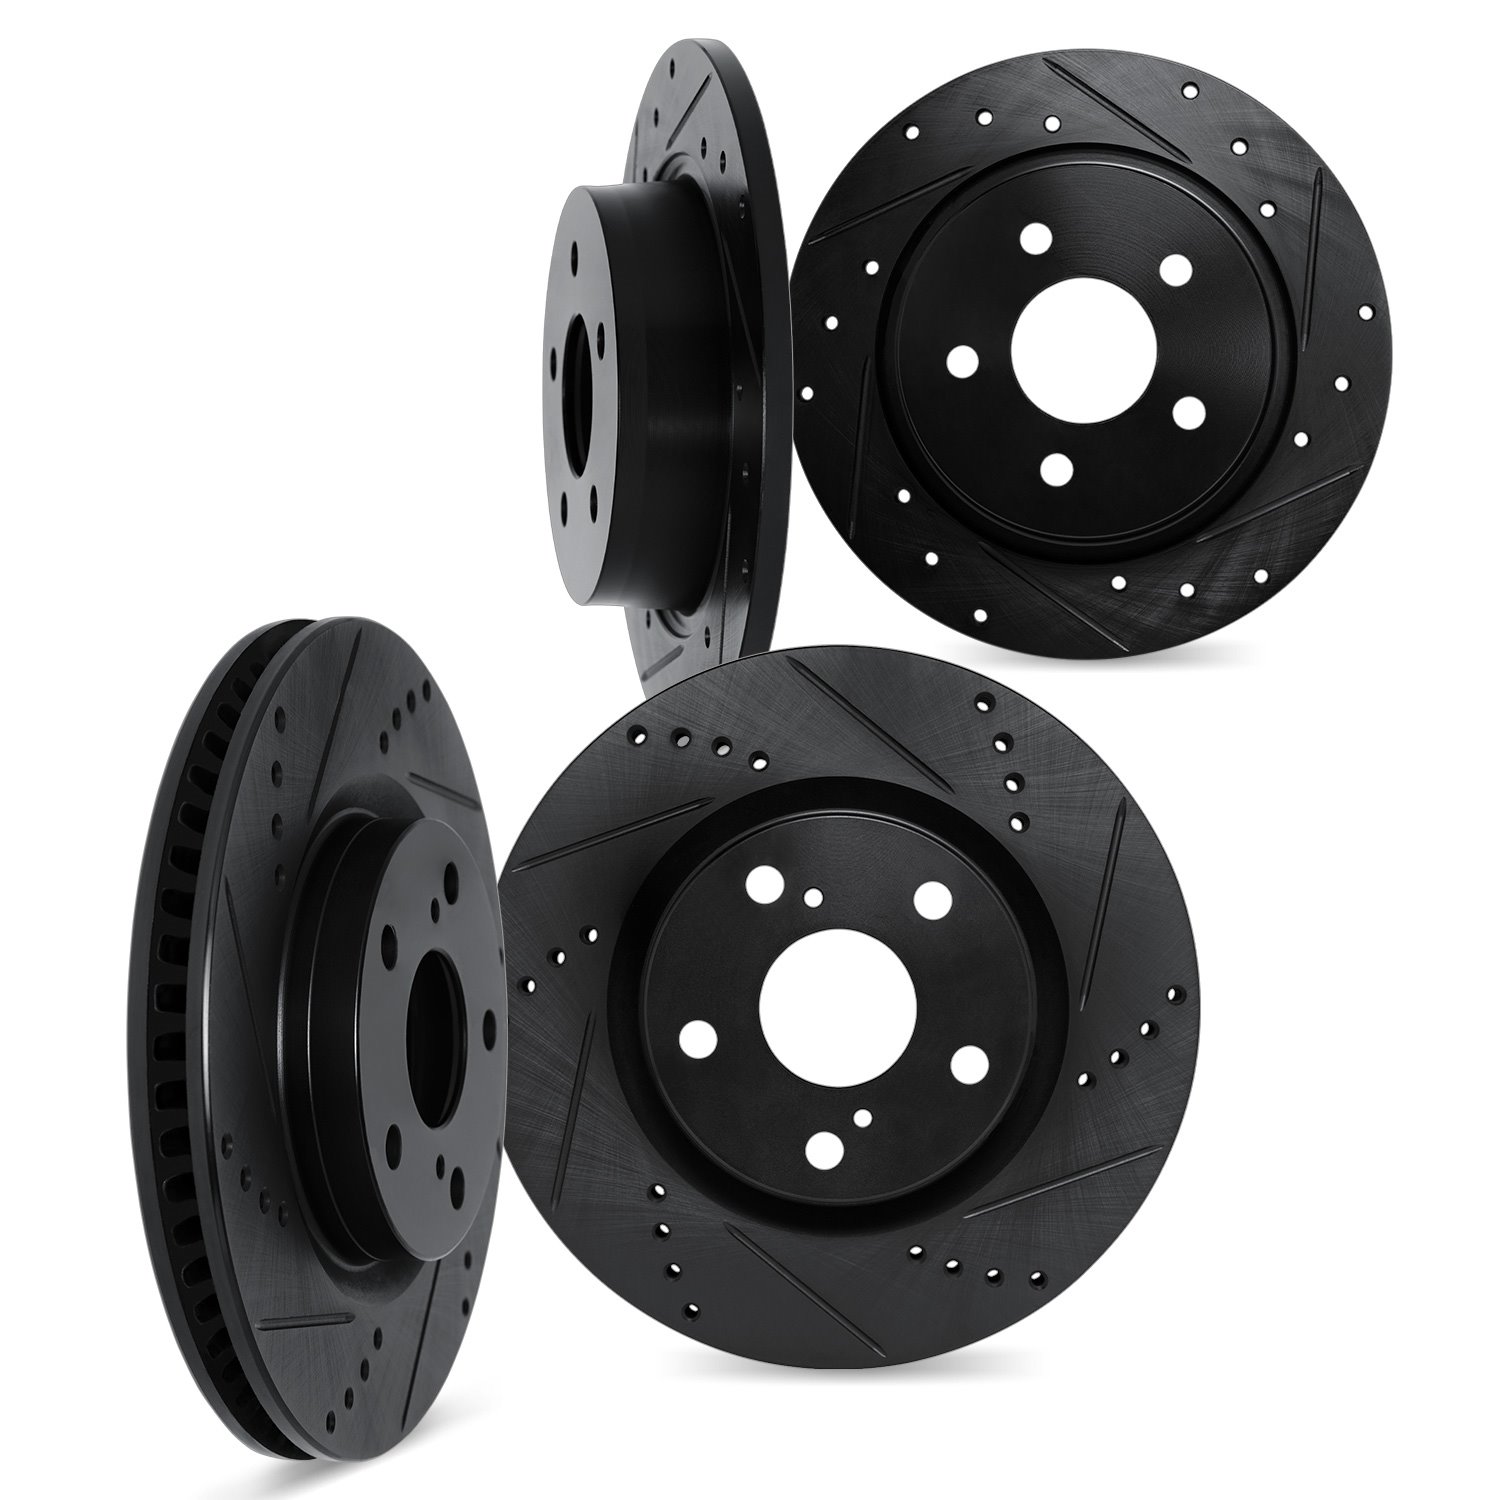 8004-76020 Drilled/Slotted Brake Rotors [Black], 1999-2003 Lexus/Toyota/Scion, Position: Front and Rear